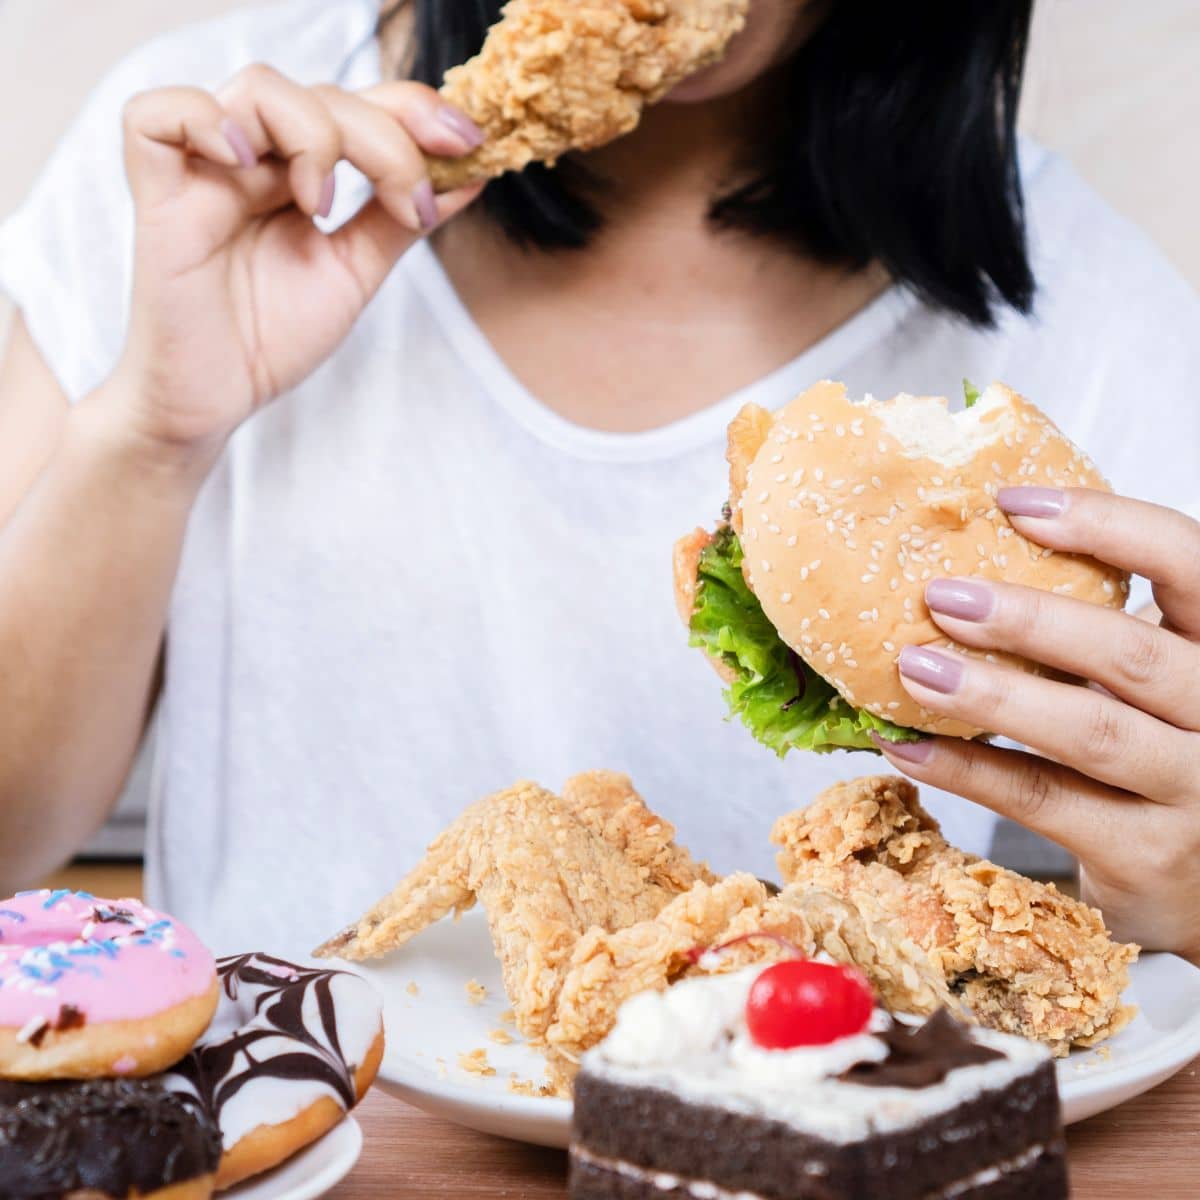 woman binge eating on plates of fried foods and desserts